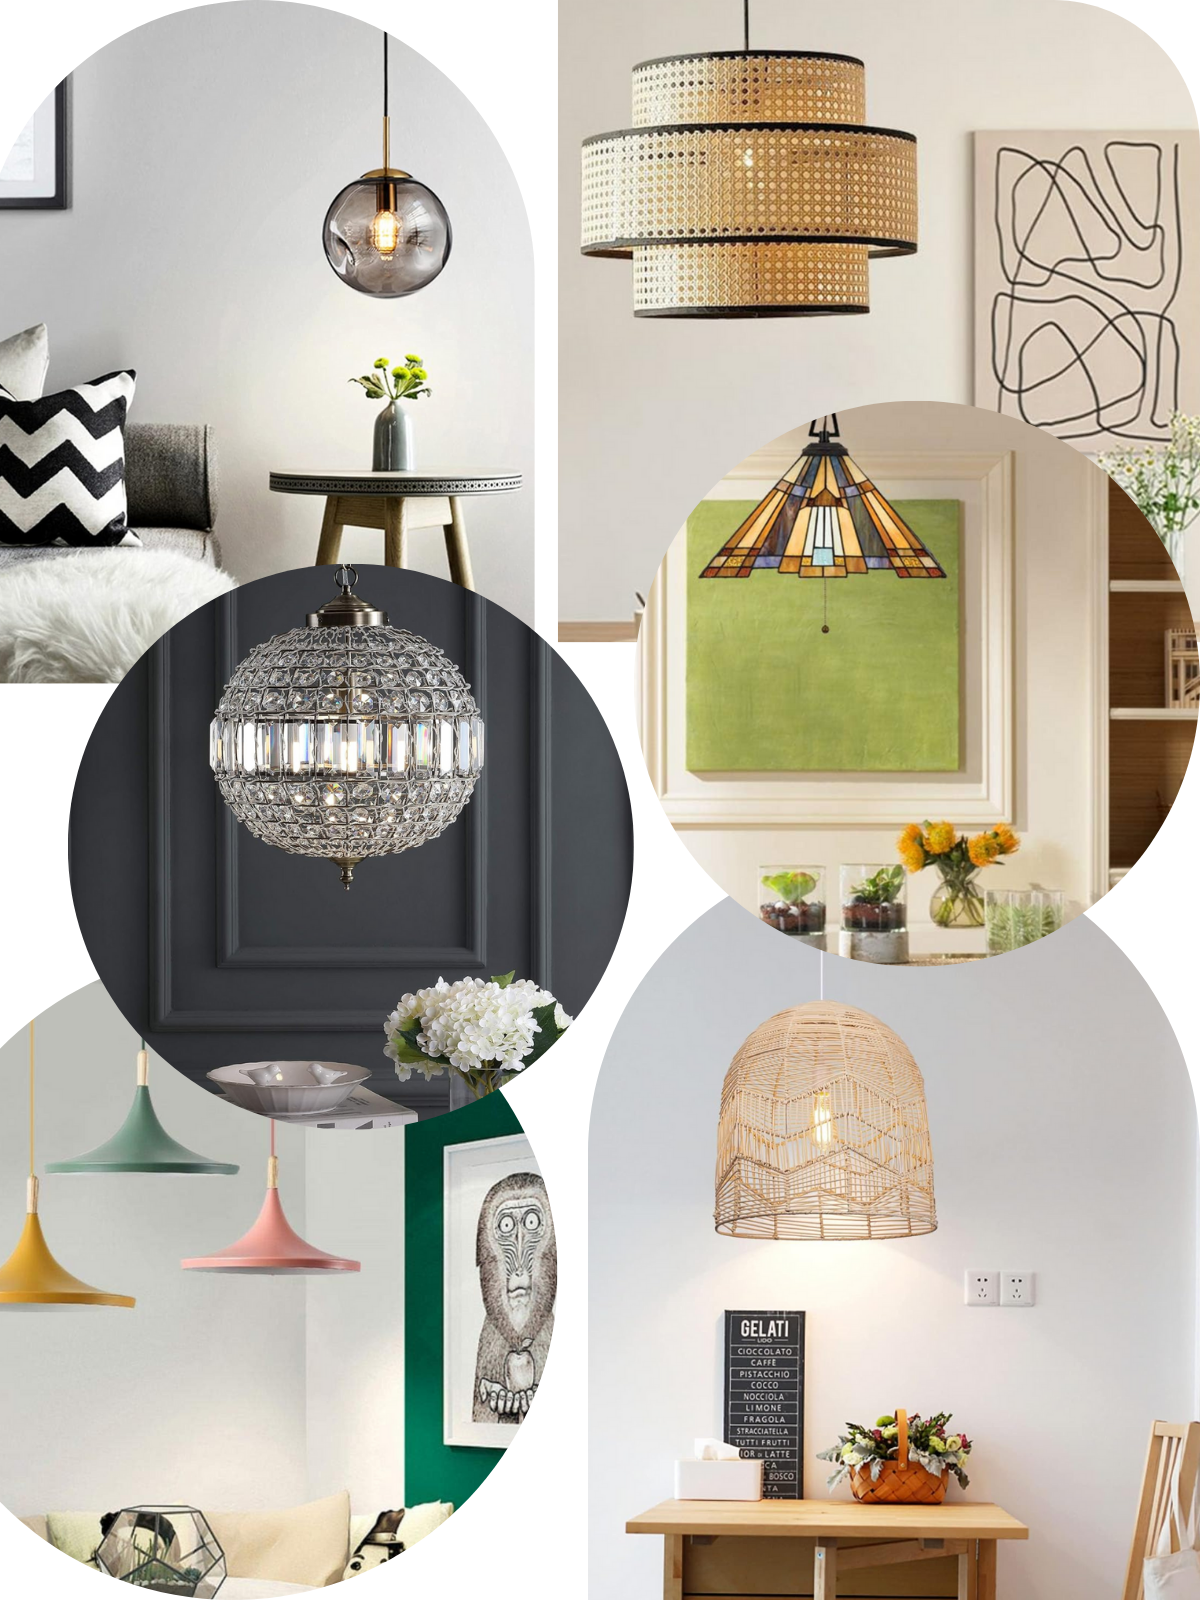 Design Tips for Hanging Pendant Lights and Our Top 10 Picks